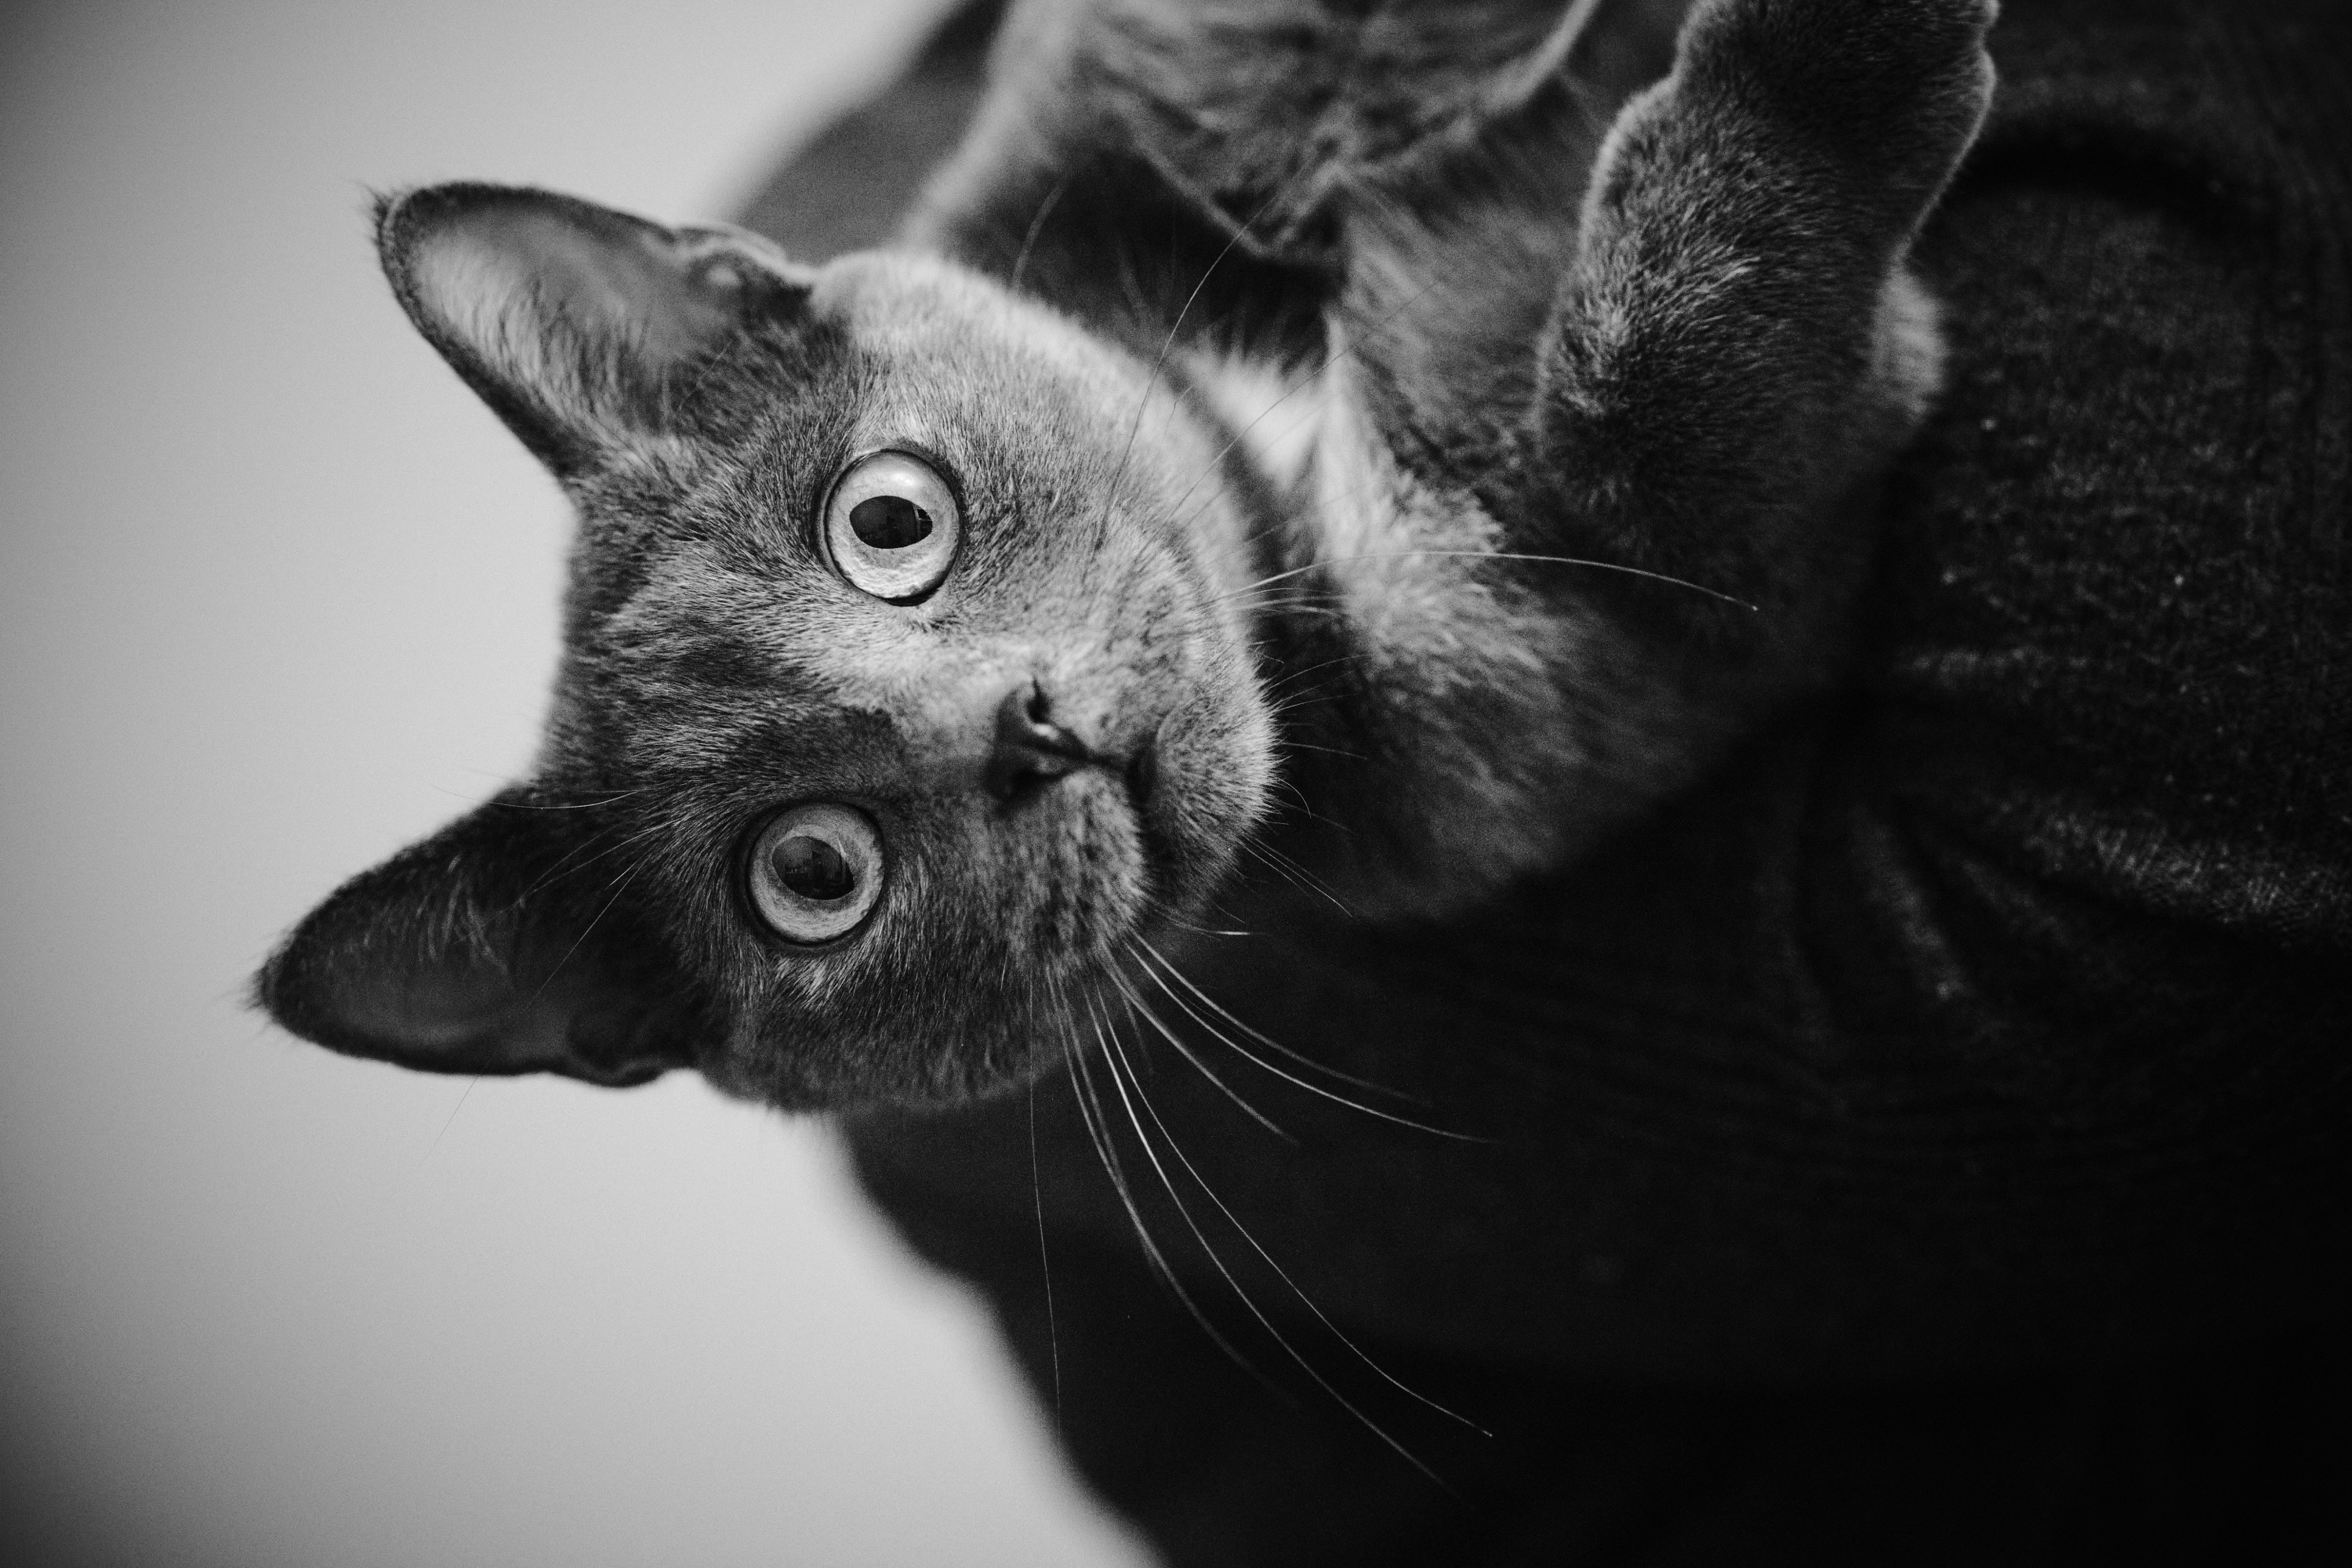 Black and white photo of a kitty in someone's arms, head cocked sideways